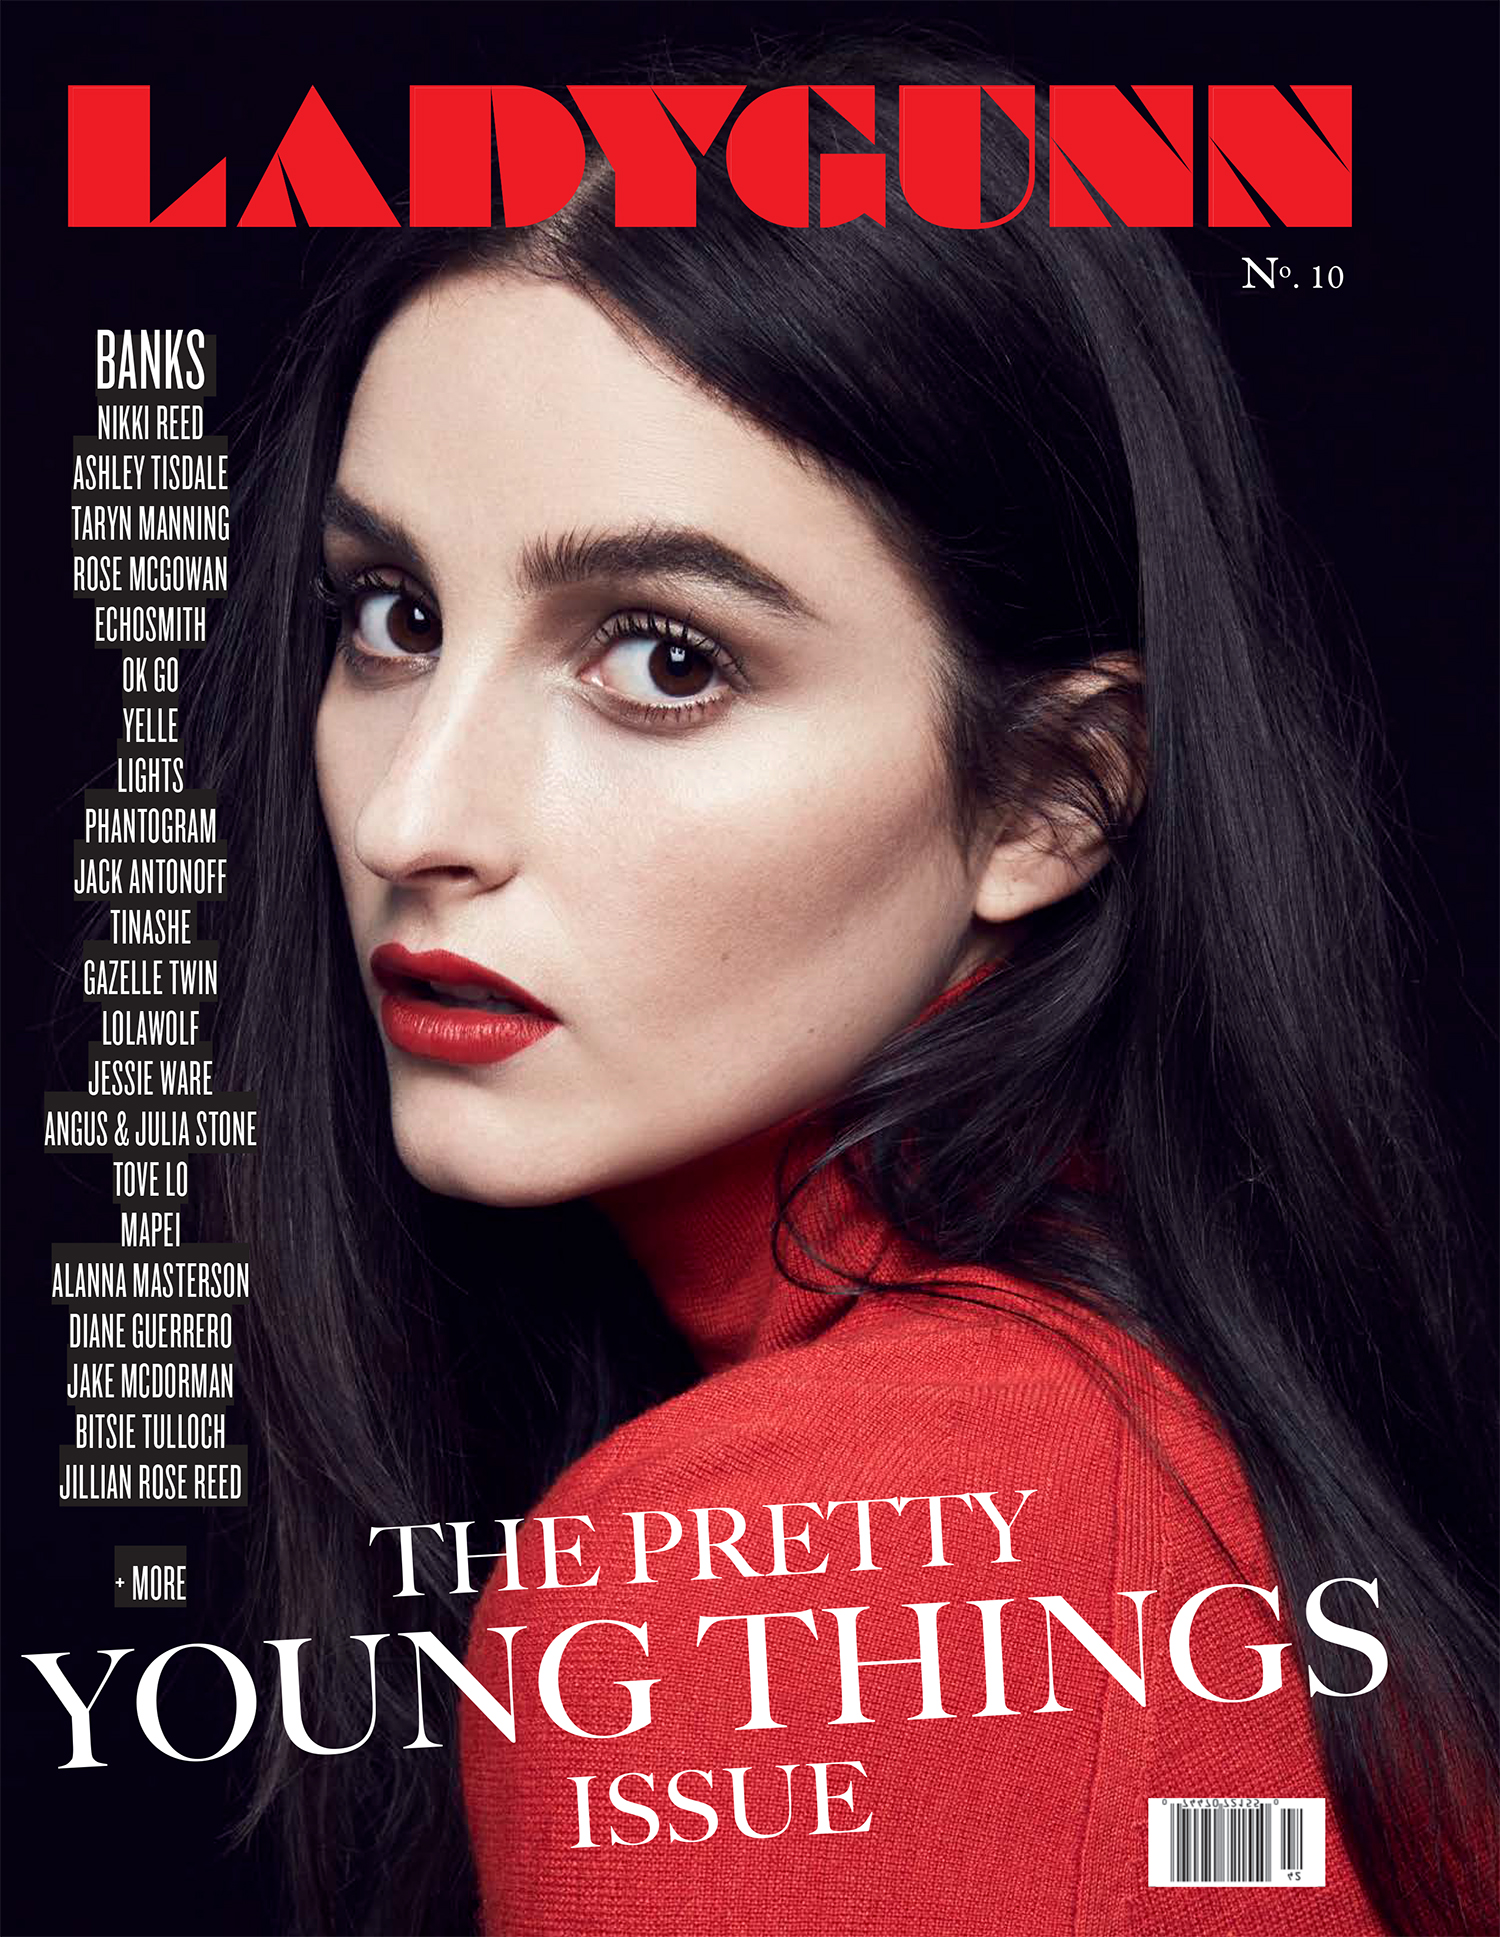 LADYGUNN #10 – Pretty Young Things -Digital Issue